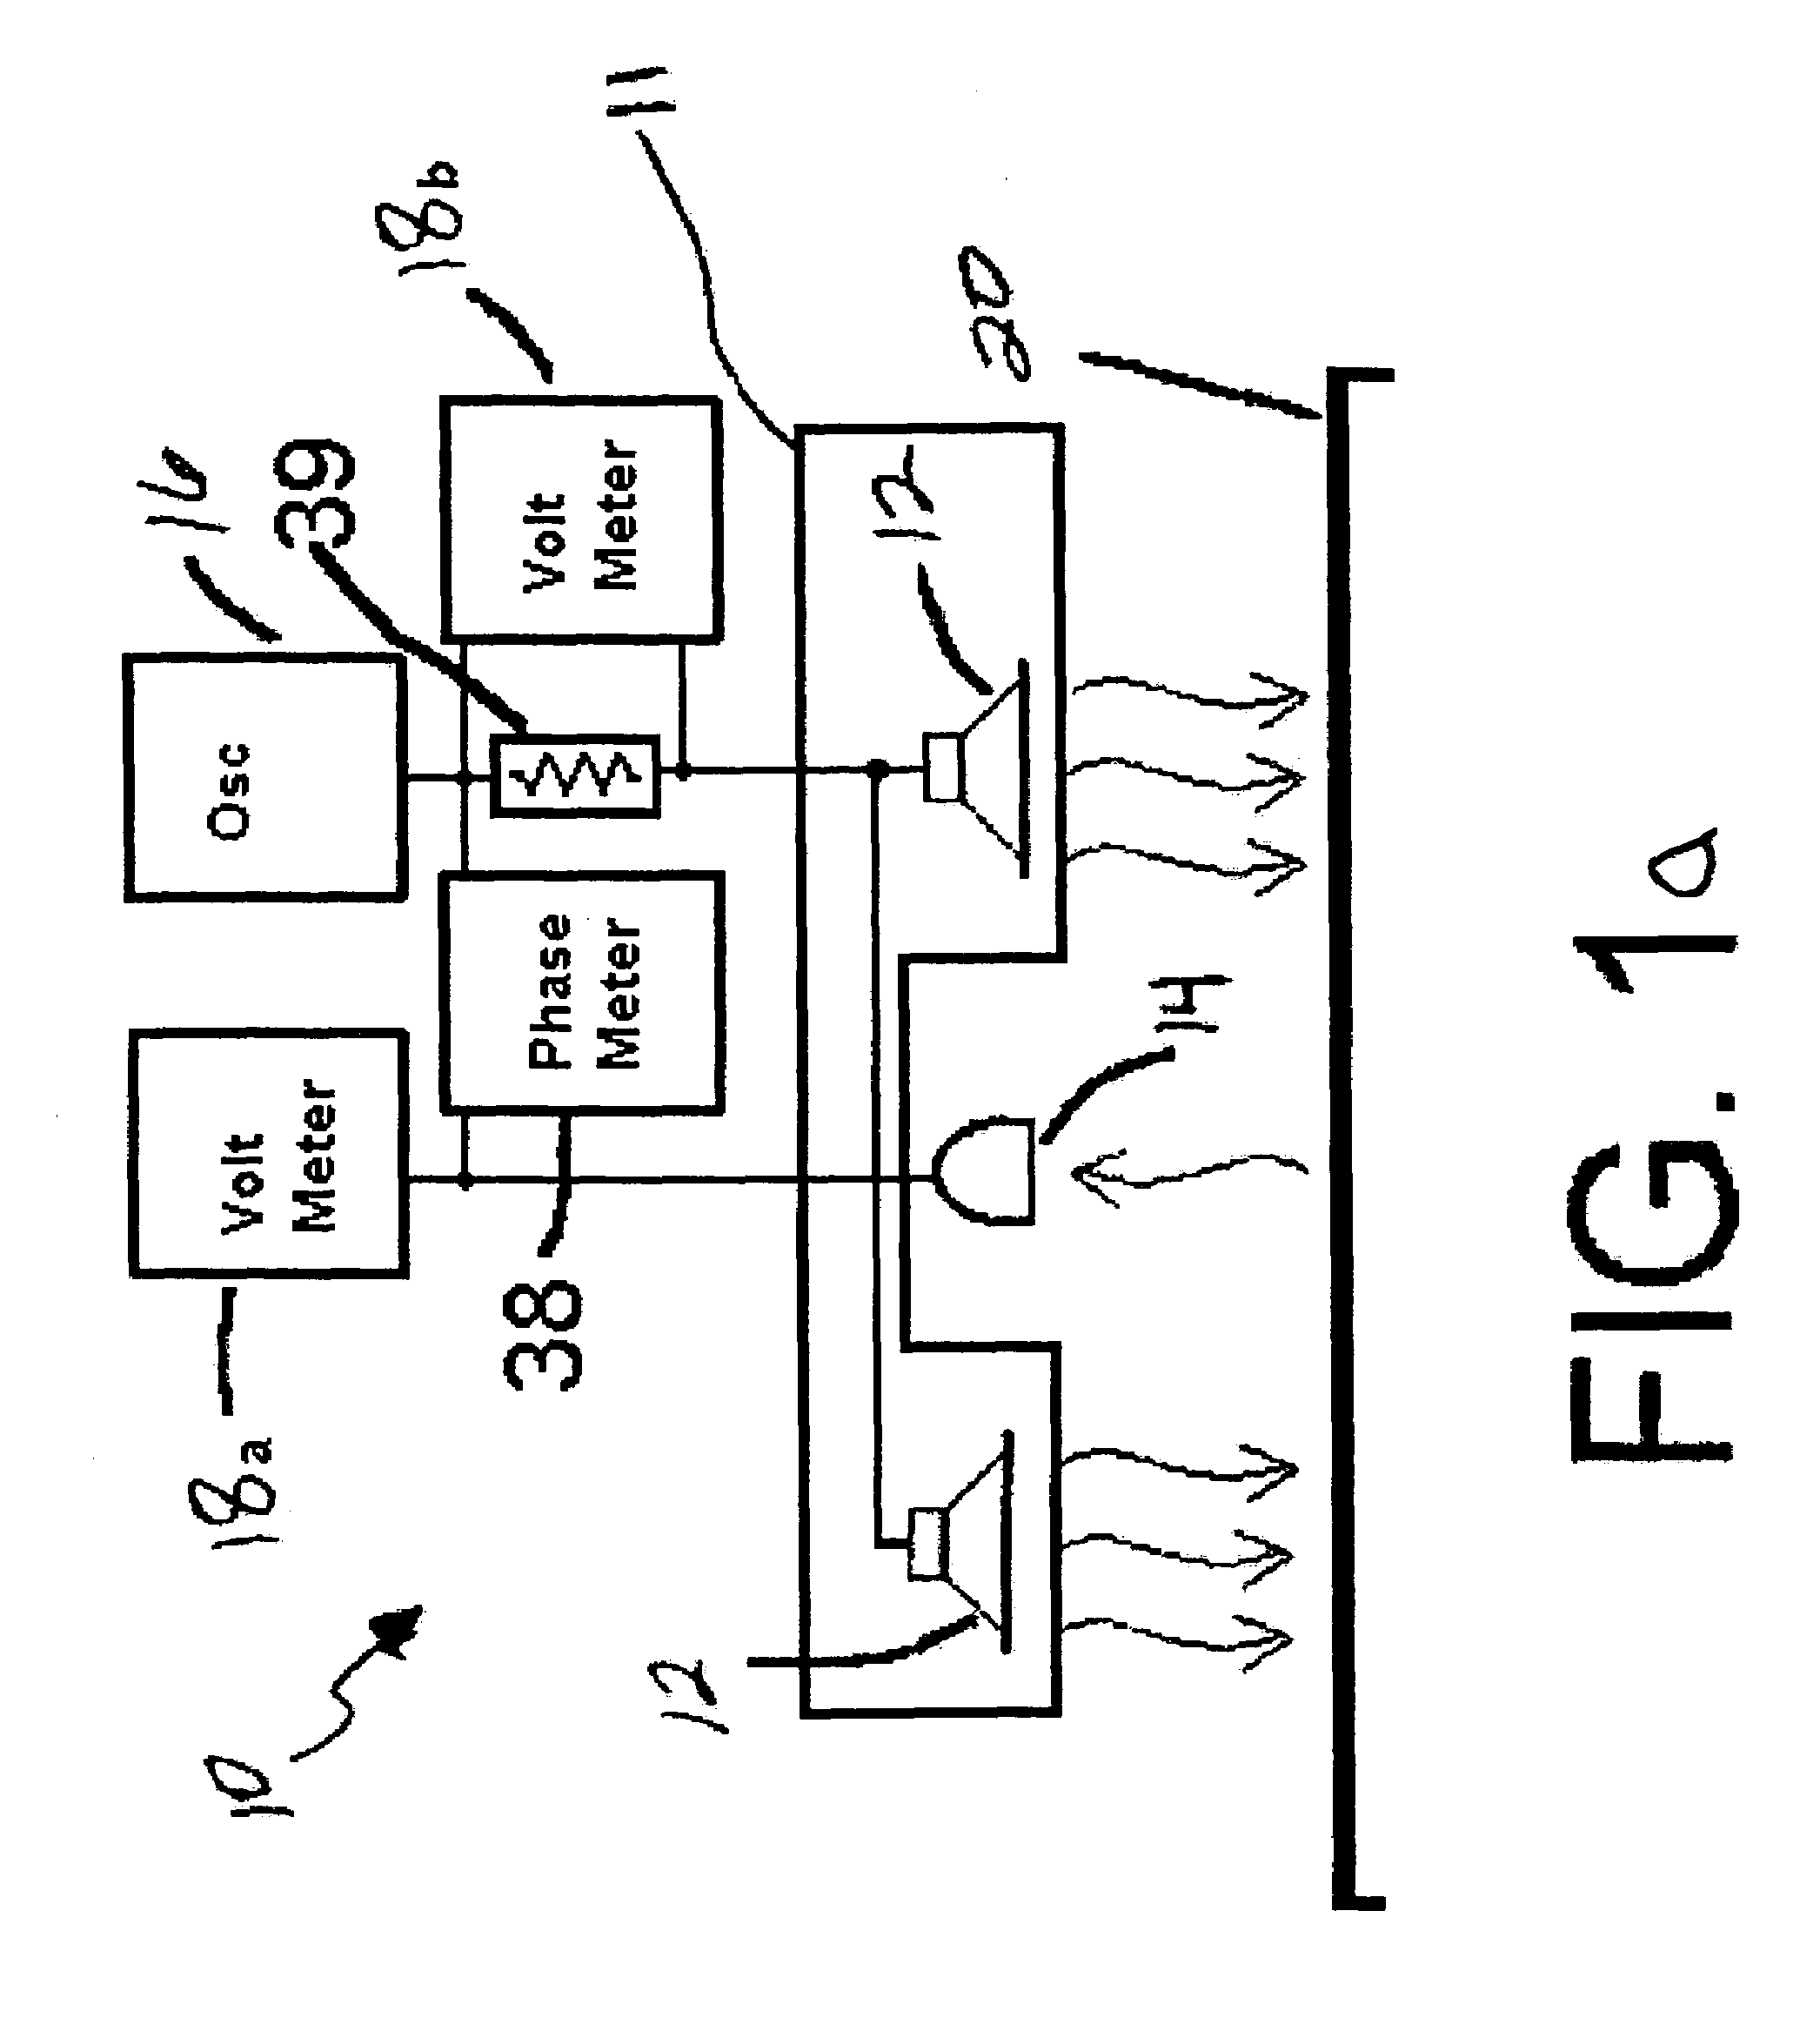 Apparatus and method for measuring the acoustic properties of a membranophone